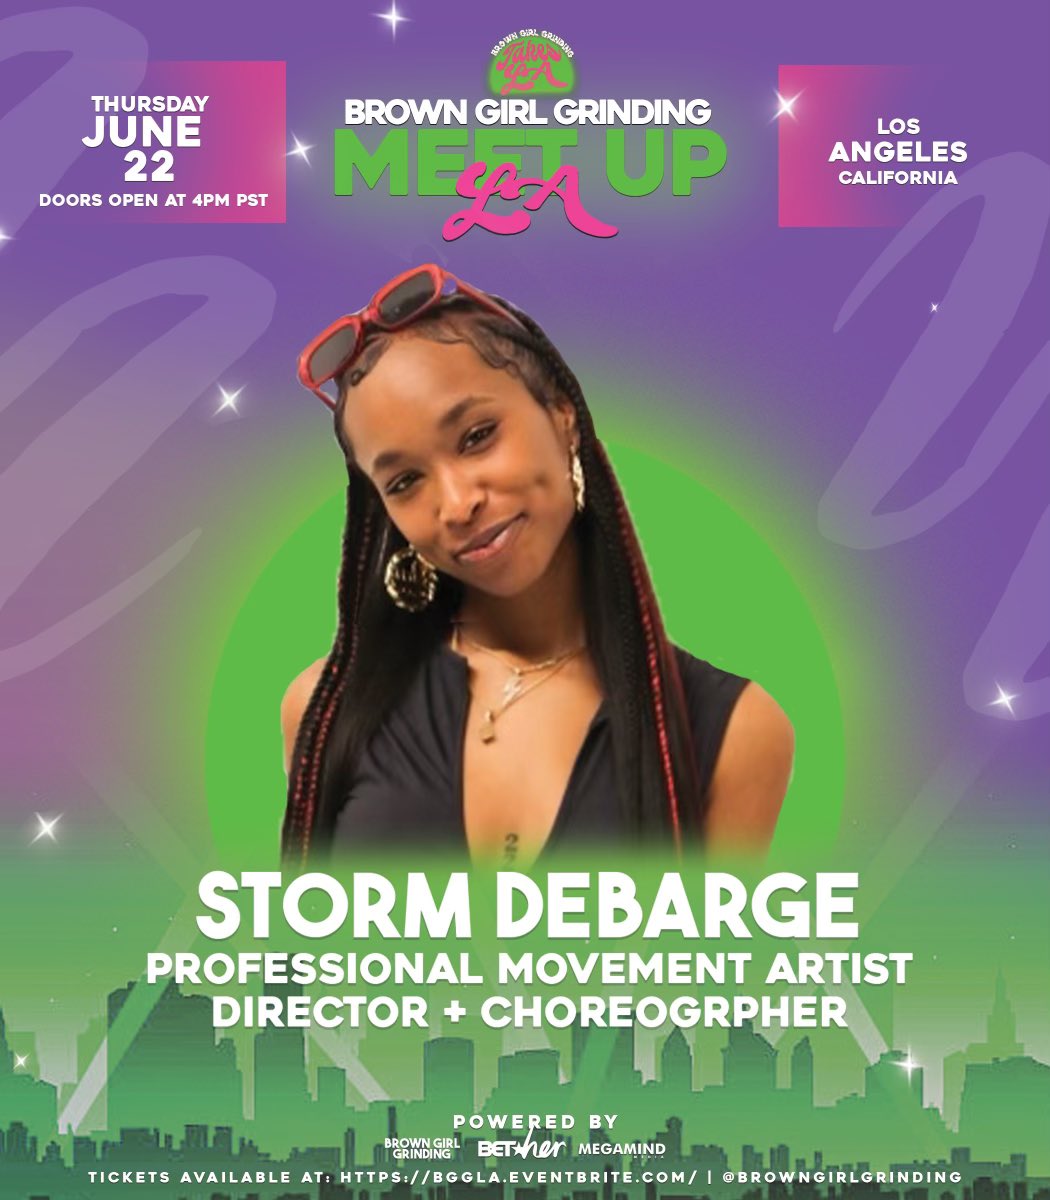 Join me & @browngirlgrinding during the 2023 BET Awards Weekend for the “Brown Girl Grinding Meet Up” 

Happening THURSDAY JUNE 22nd hosted by TMZ Senior News Producer & BGG Founder  @lorenlorosa 

🎟️TIX ARE NOW LIVE! (Link in the @browngirlgrinding bio) 

bggla.eventbrite.com